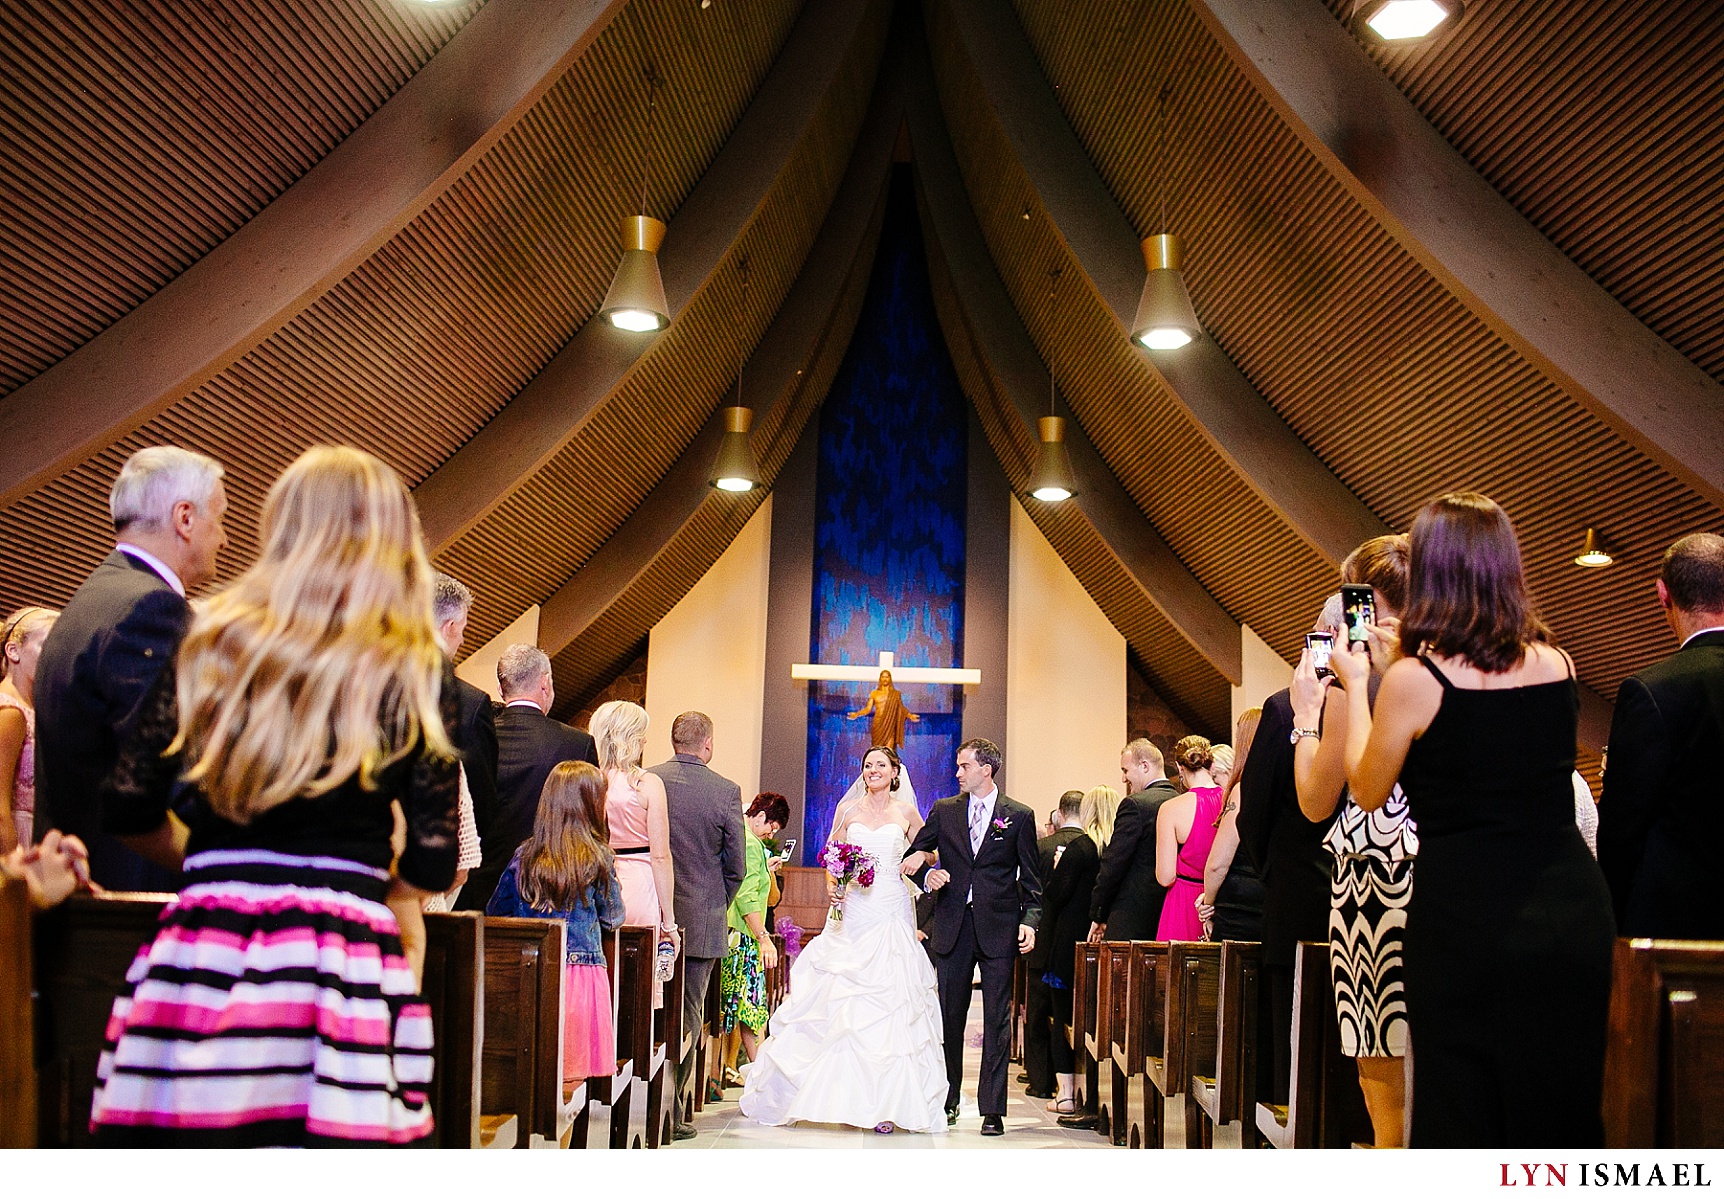 The bride and groom walks down the aisle of the St Mike's Catholic Church as newlyweds.